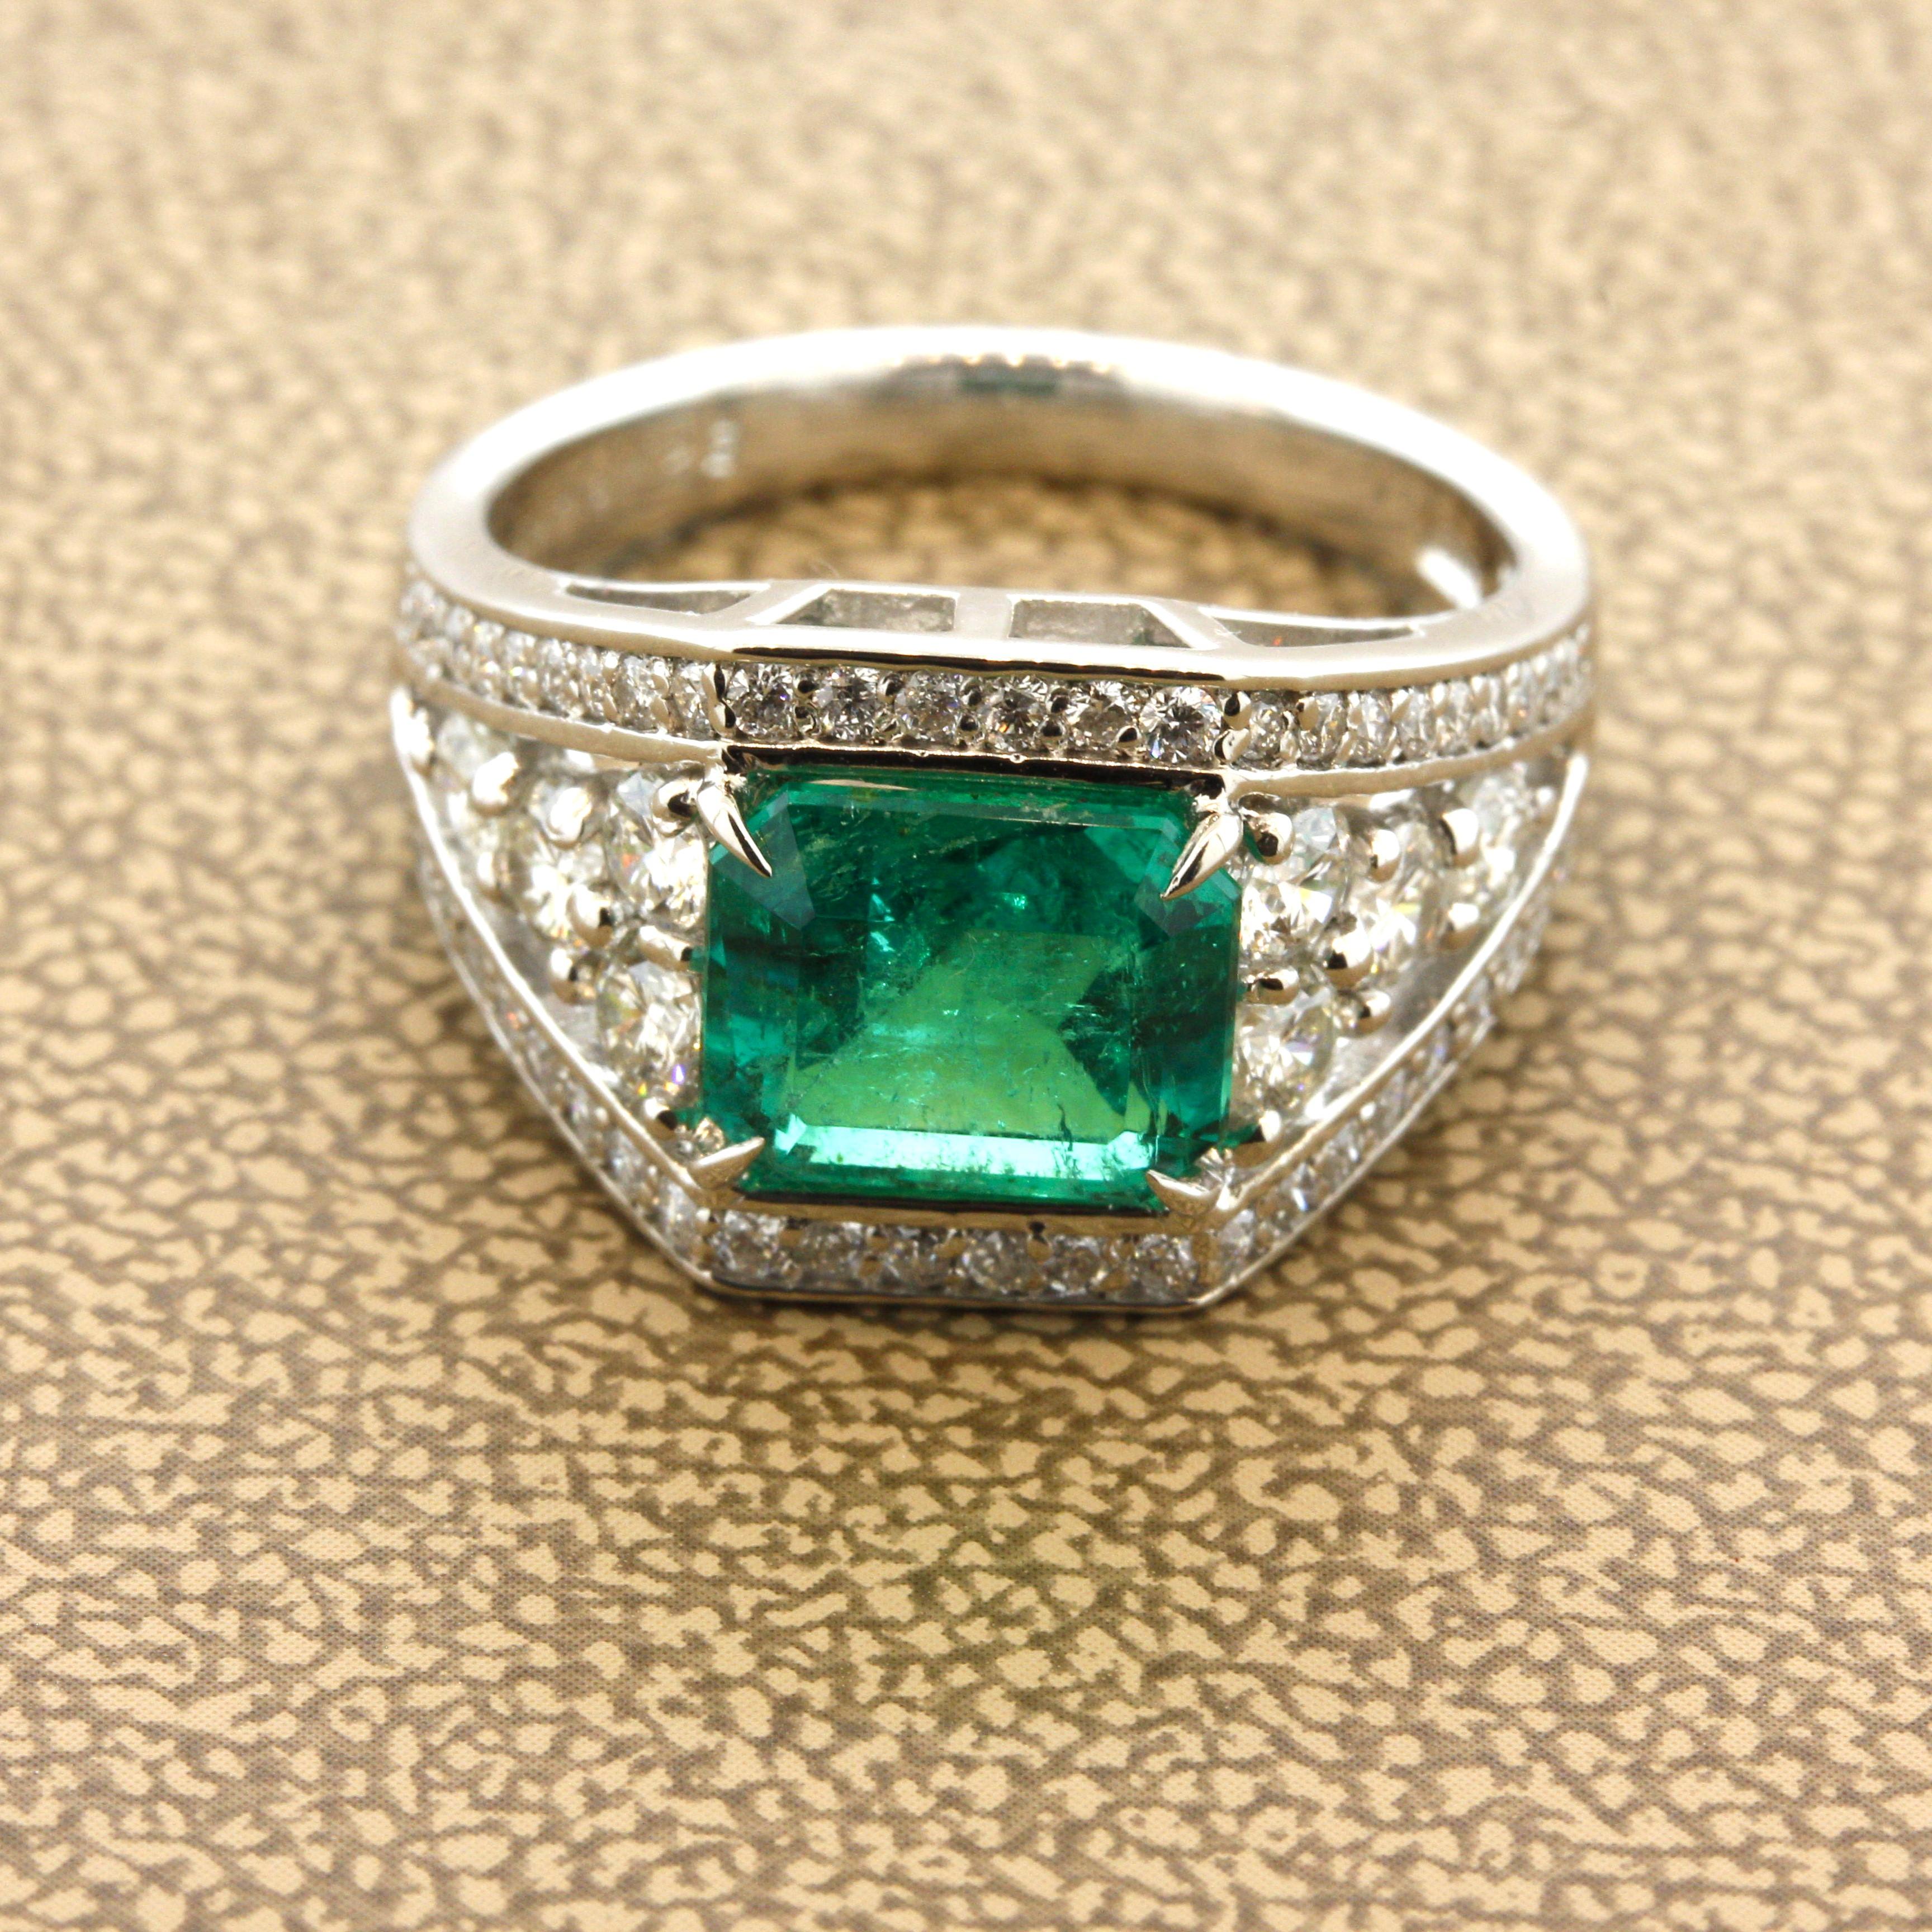 A gem of an emerald weighing 2.16 carats with a rich intense green color. It comes from the famous emerald mines of Colombia and adding to that, it has an insignificant amount of clarity enhancement which is extremely rare for emeralds. The stone